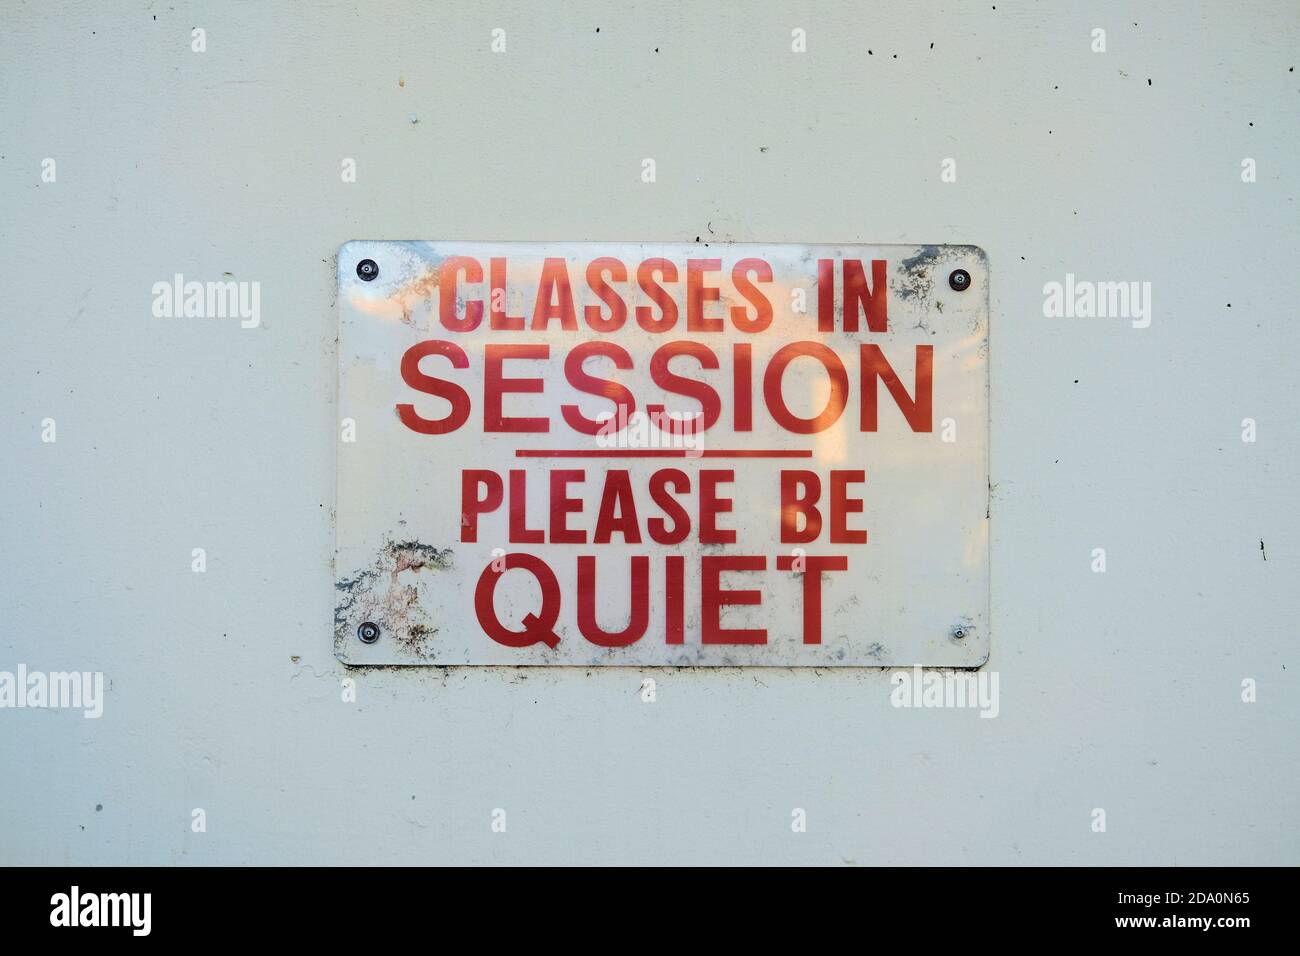 Clear transparent plastic sign with red letters warning that classes are in session, please be quiet; City College of San Francisco, California. Stock Photo